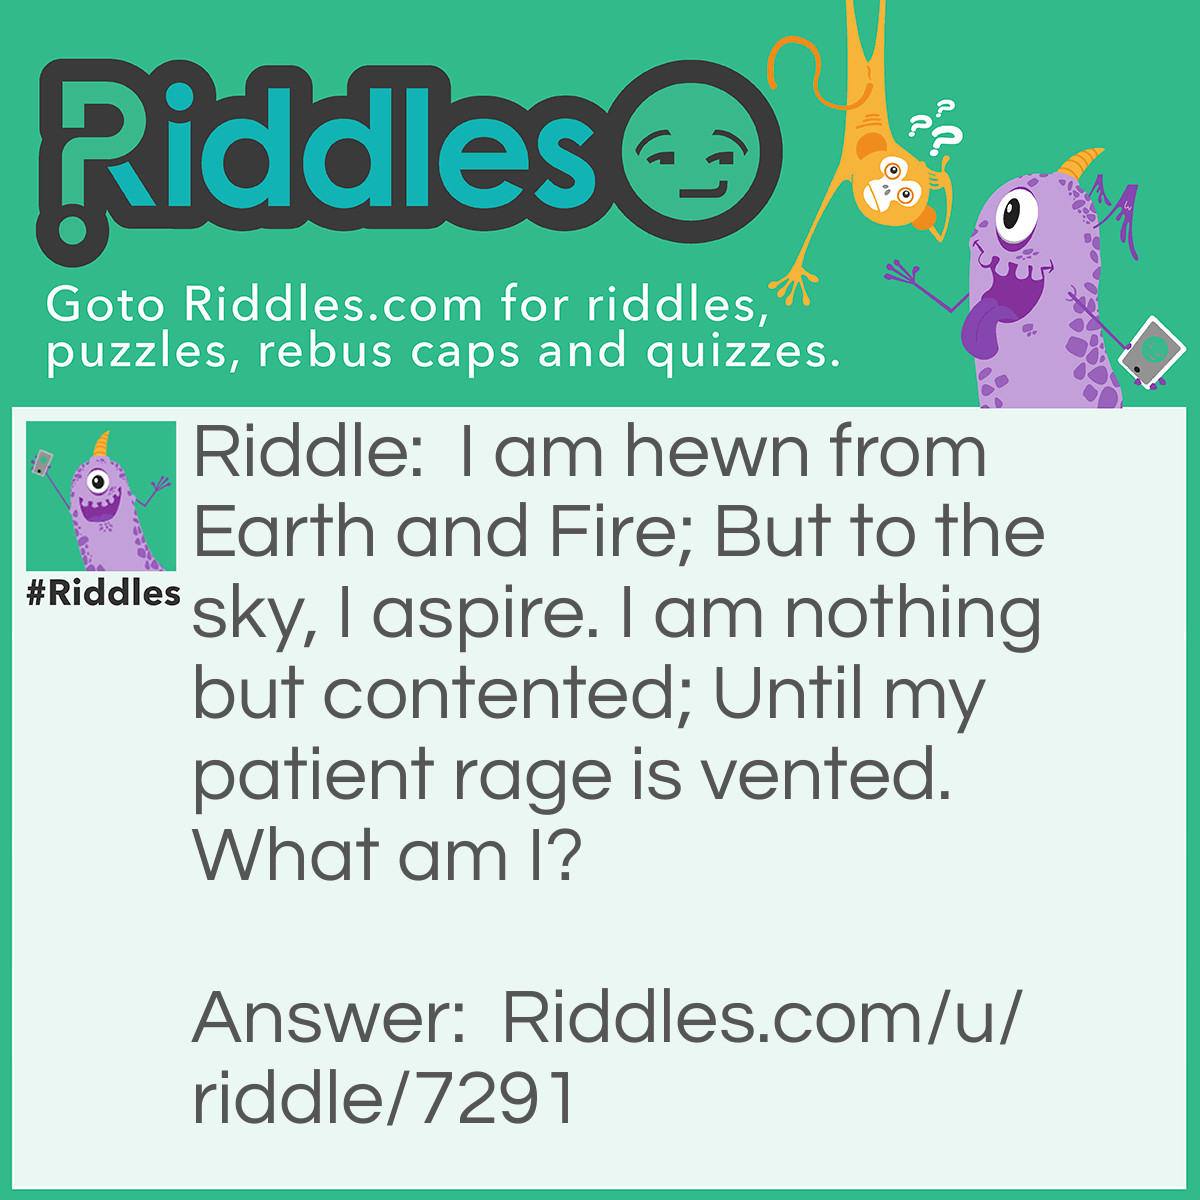 Riddle: I am hewn from Earth and Fire; But to the sky, I aspire. I am nothing but contented; Until my patient rage is vented. What am I? Answer: A volcano.